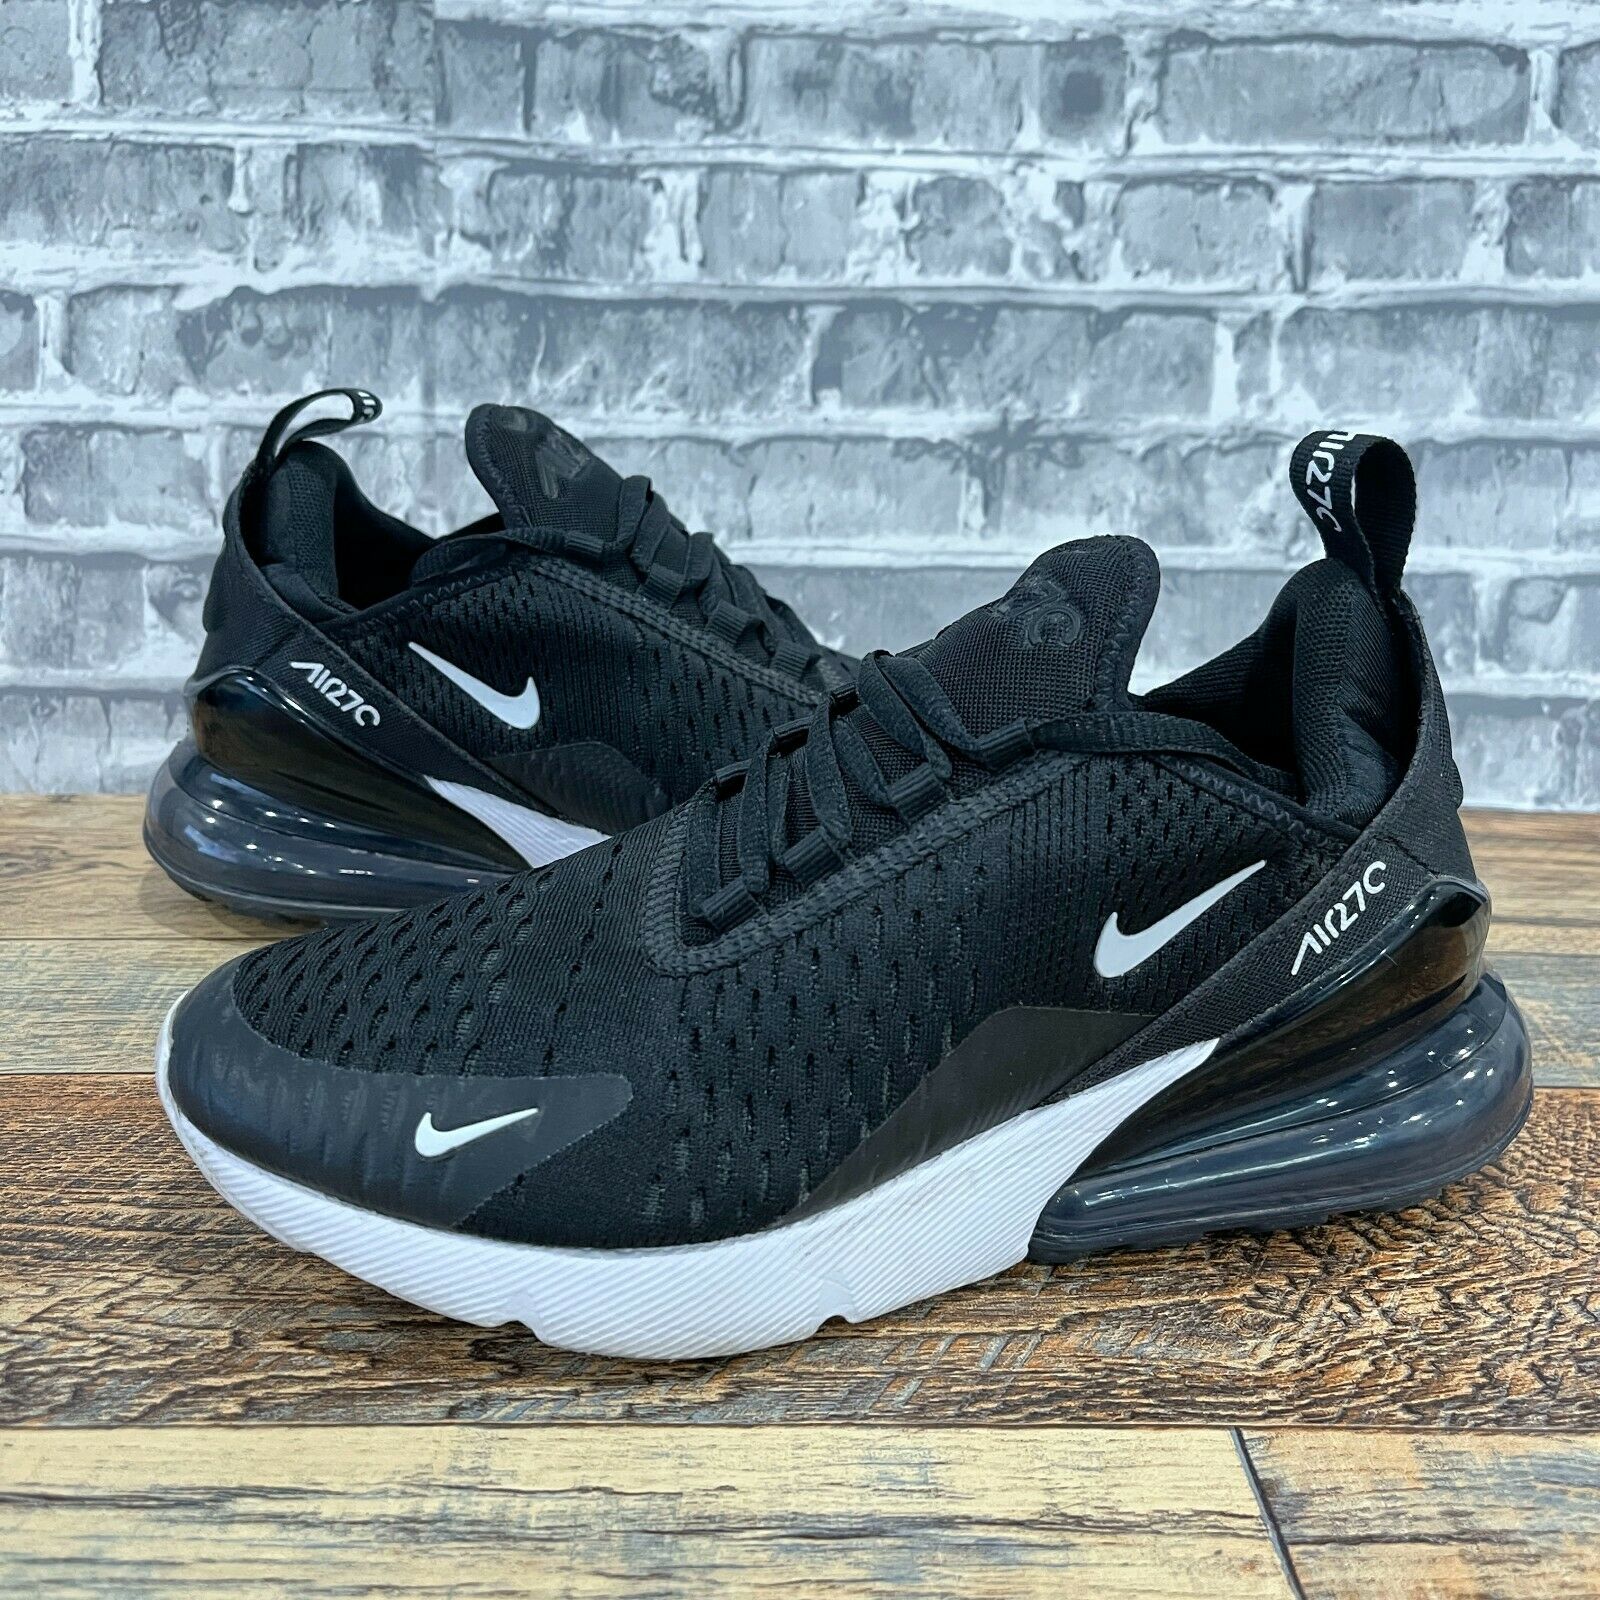 Nike Air Max 270 Black White Youth Size 4.5Y / Womens 6 Running Shoes 943345-001